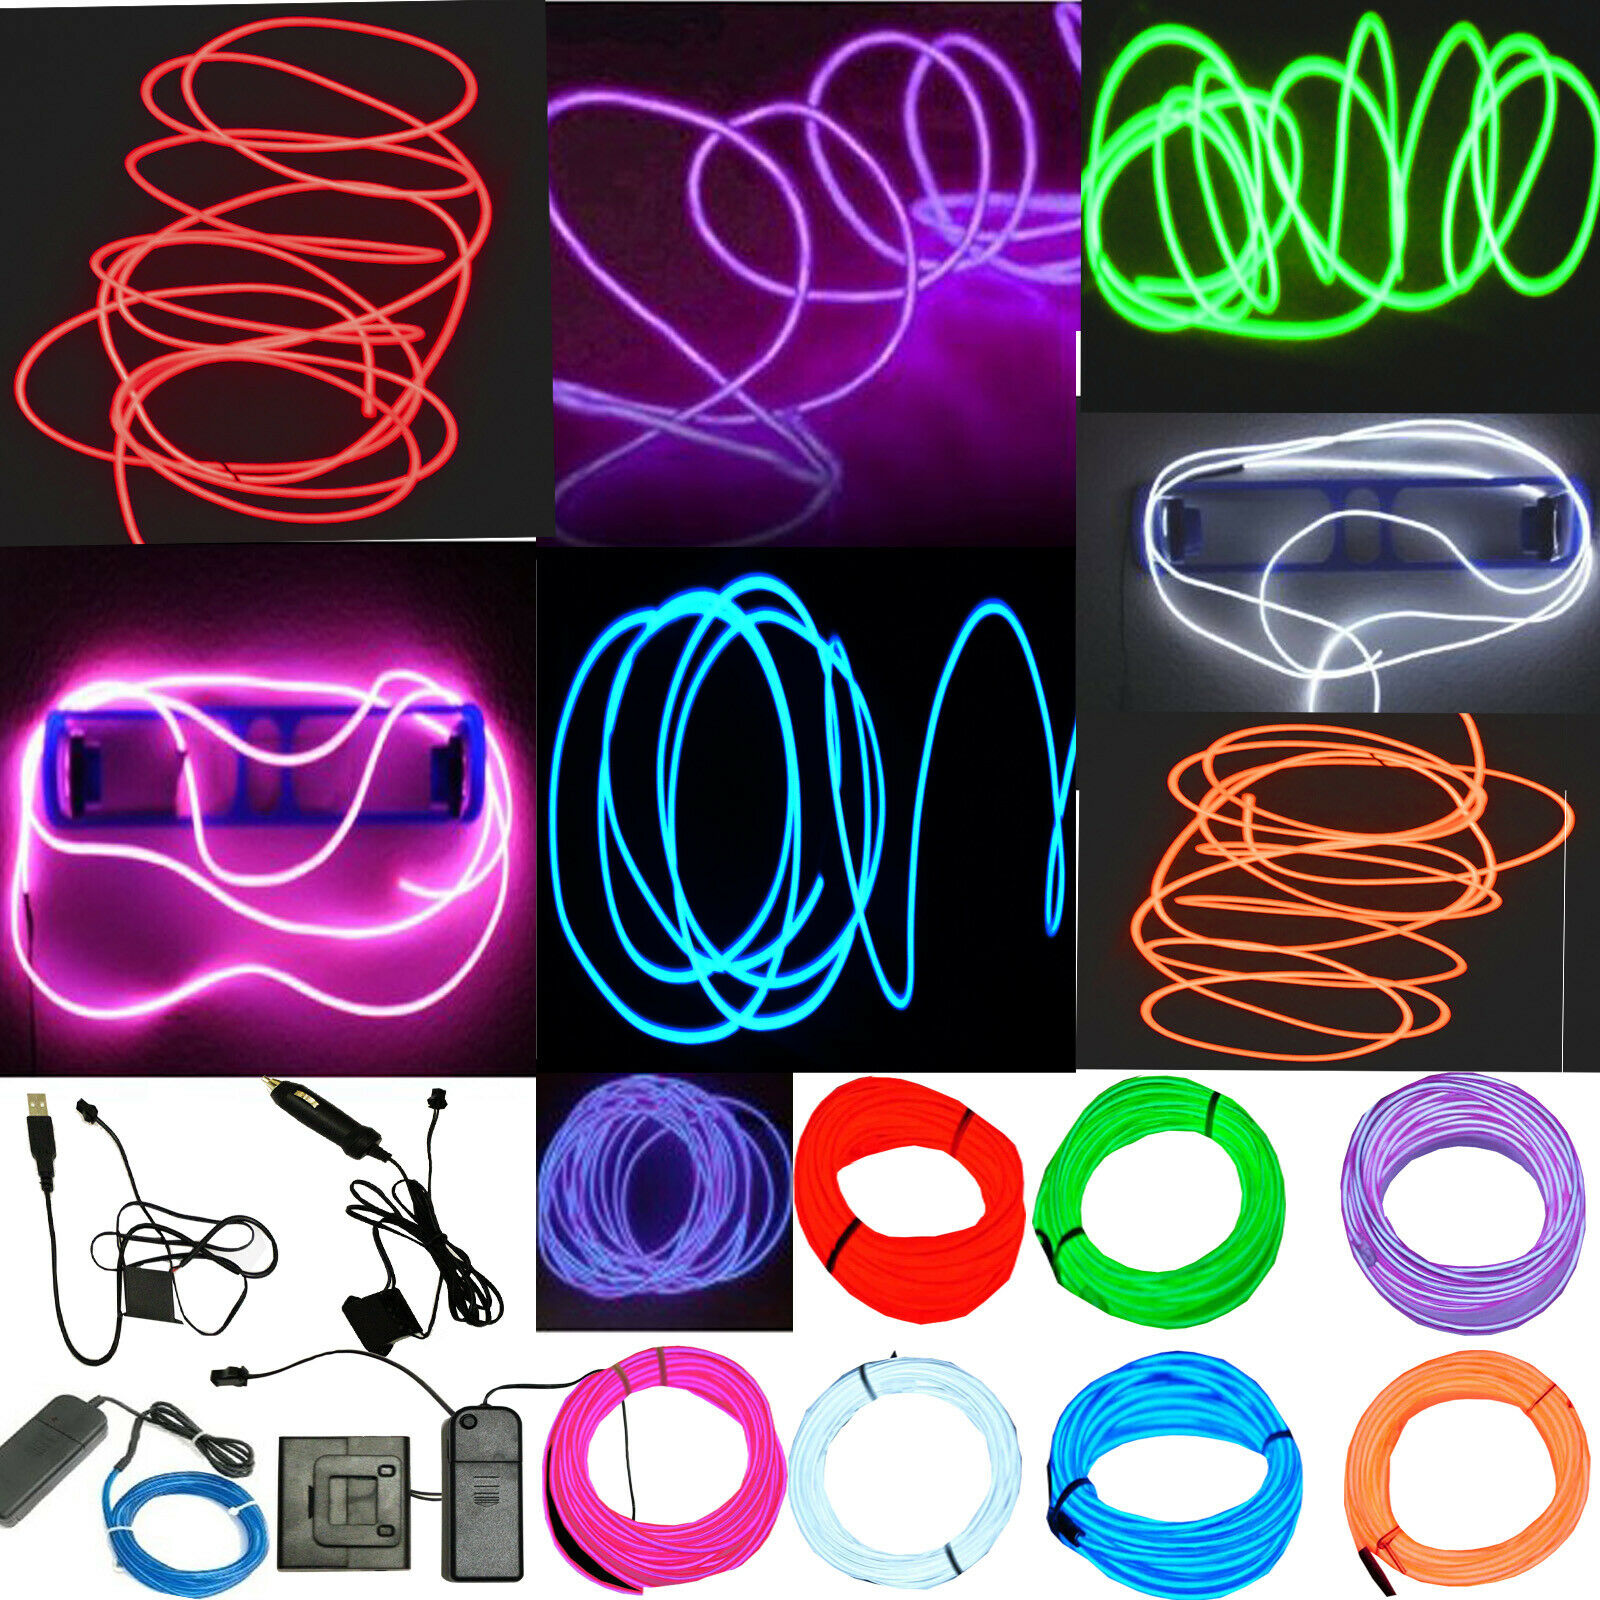 Neon Led Light Glow El Wire String Strip Rope Tube Decor Car Party + Controller